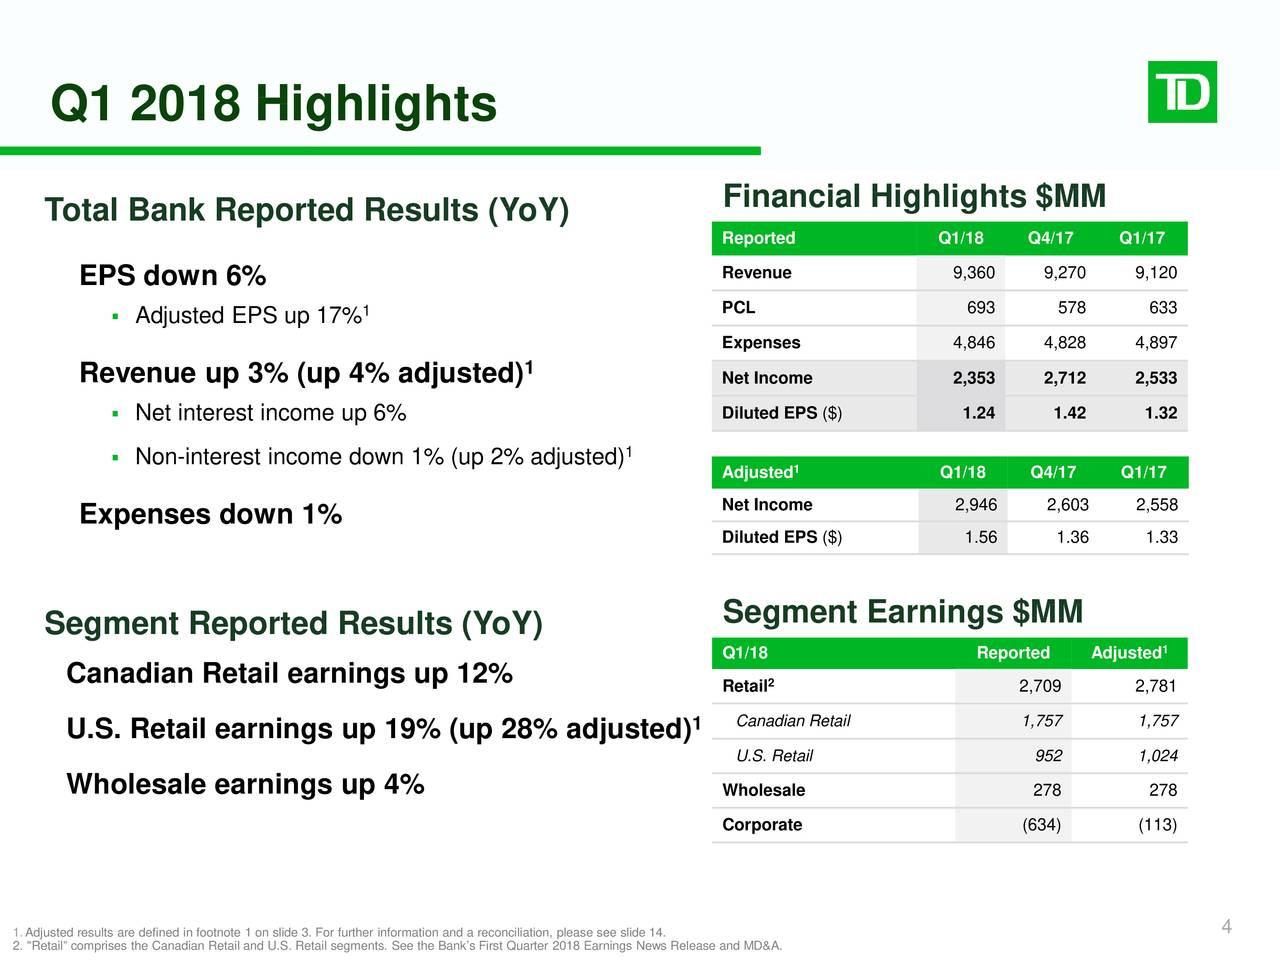 TD Bank Doubling My Dividend Yield On Cost (NYSETD) Seeking Alpha